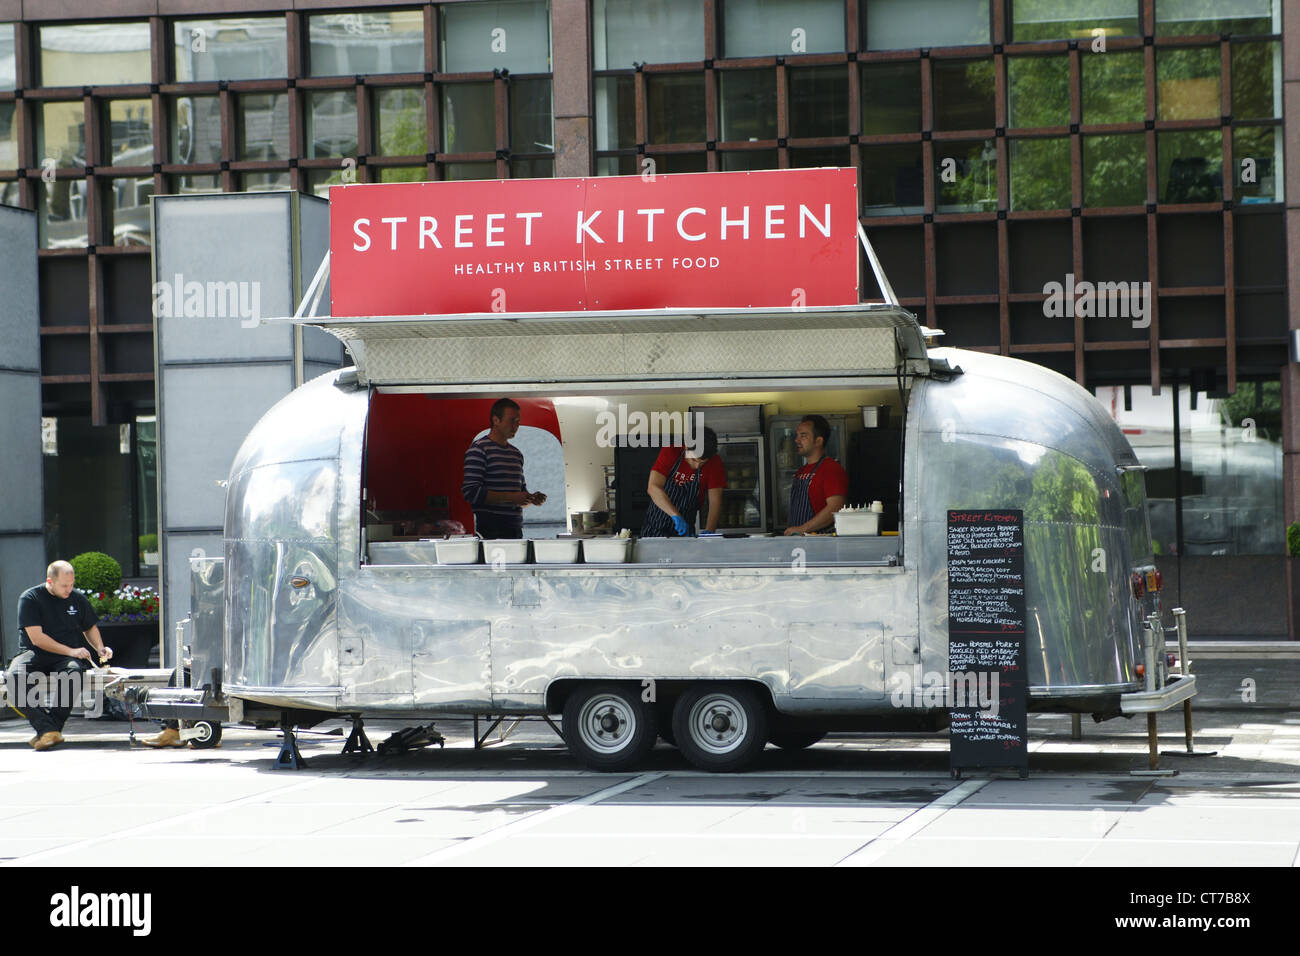 A Street Kitchen airstream trailer in London's Broadgate Circus Stock Photo